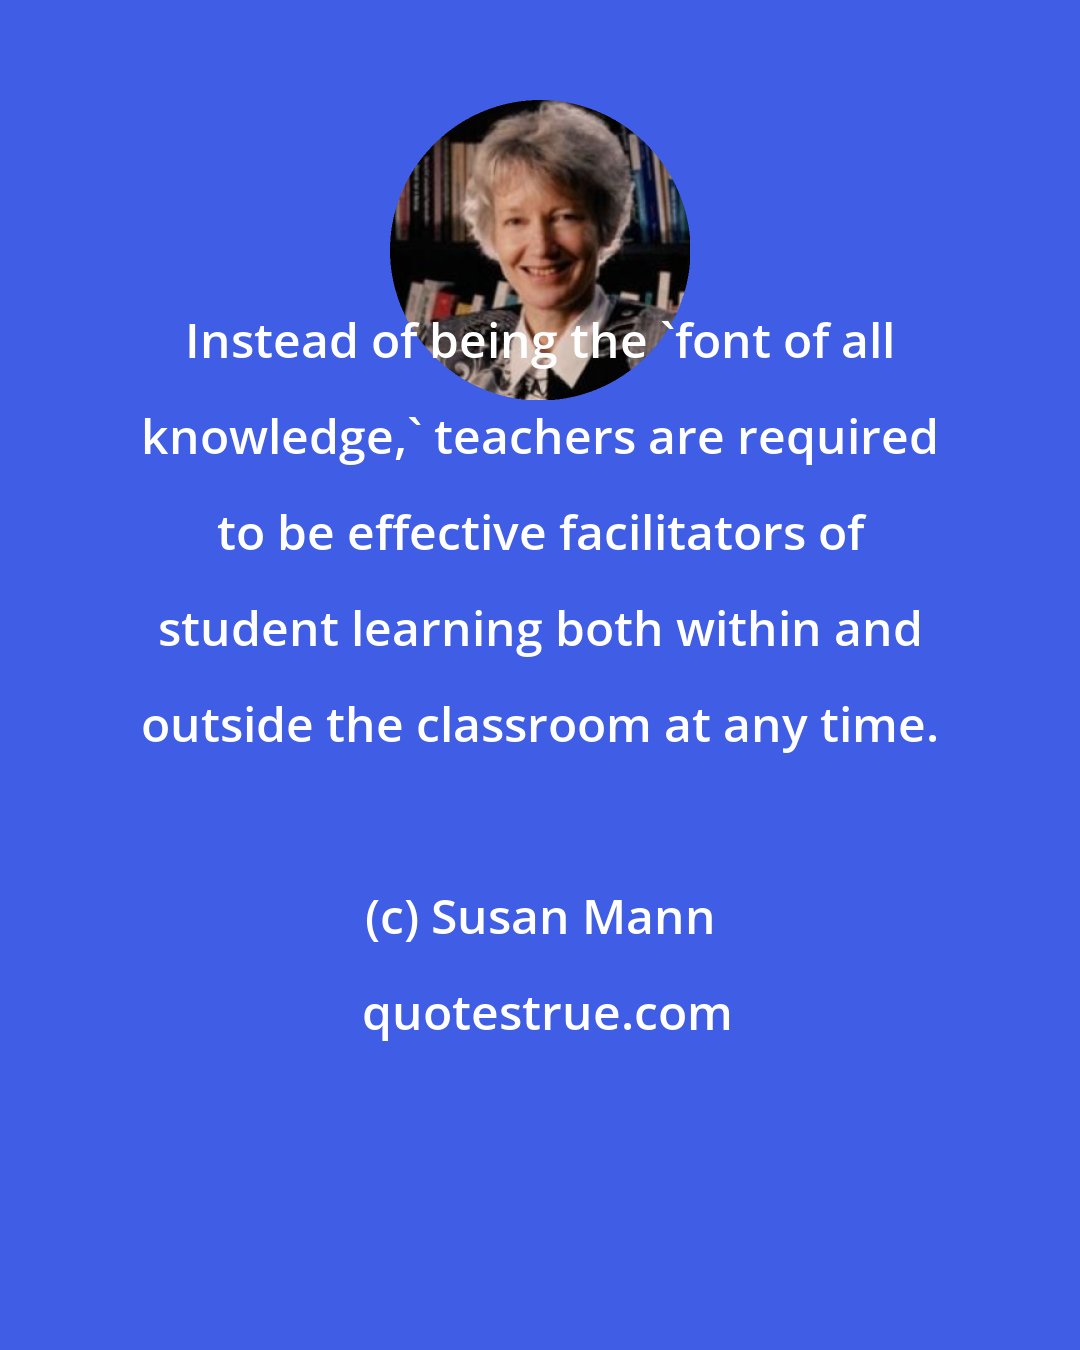 Susan Mann: Instead of being the 'font of all knowledge,' teachers are required to be effective facilitators of student learning both within and outside the classroom at any time.